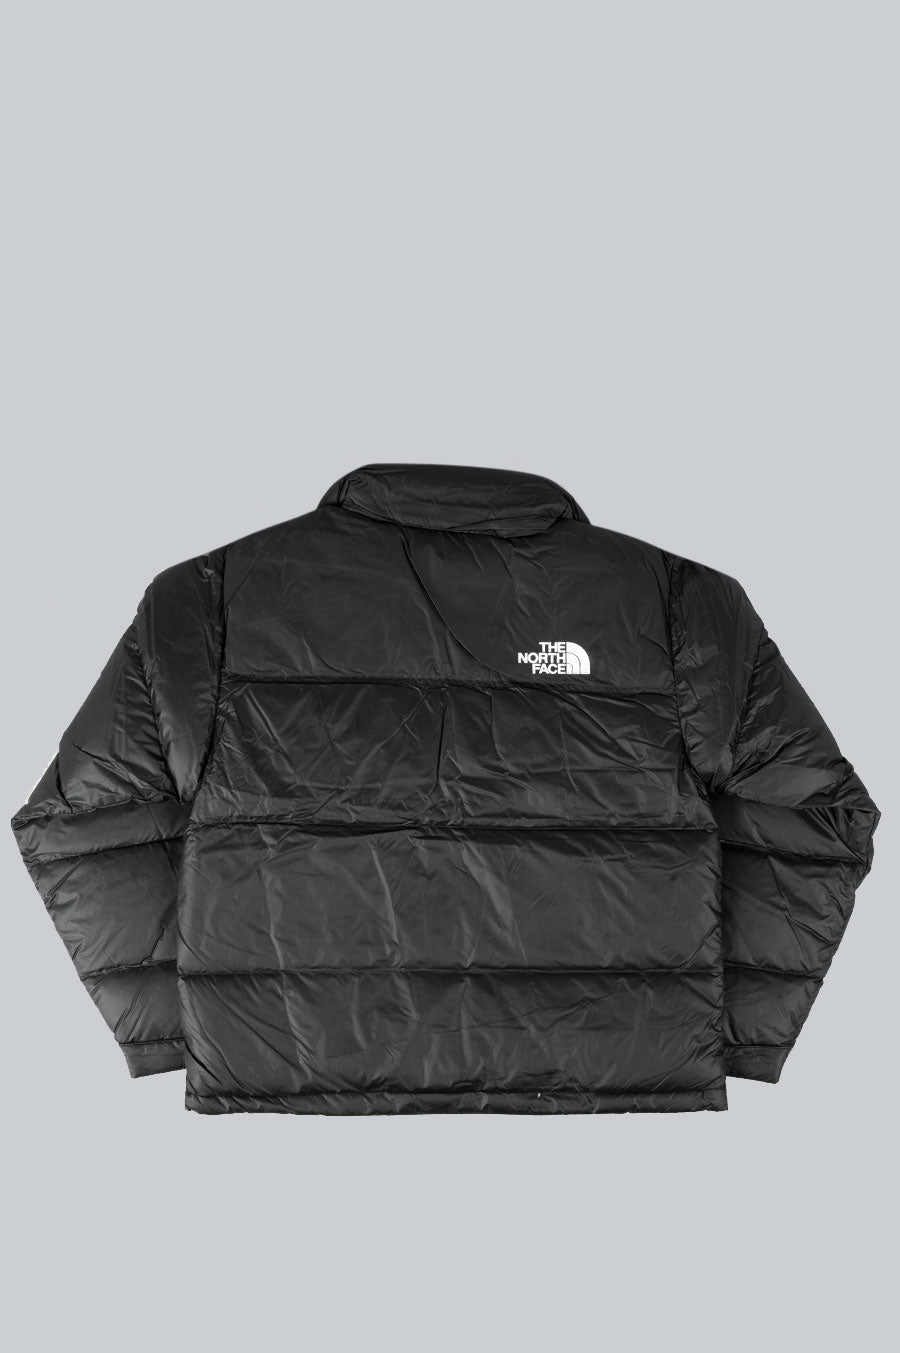 THE NORTH FACE 1996 RETRO NUPTSE RECYCLED BLACK